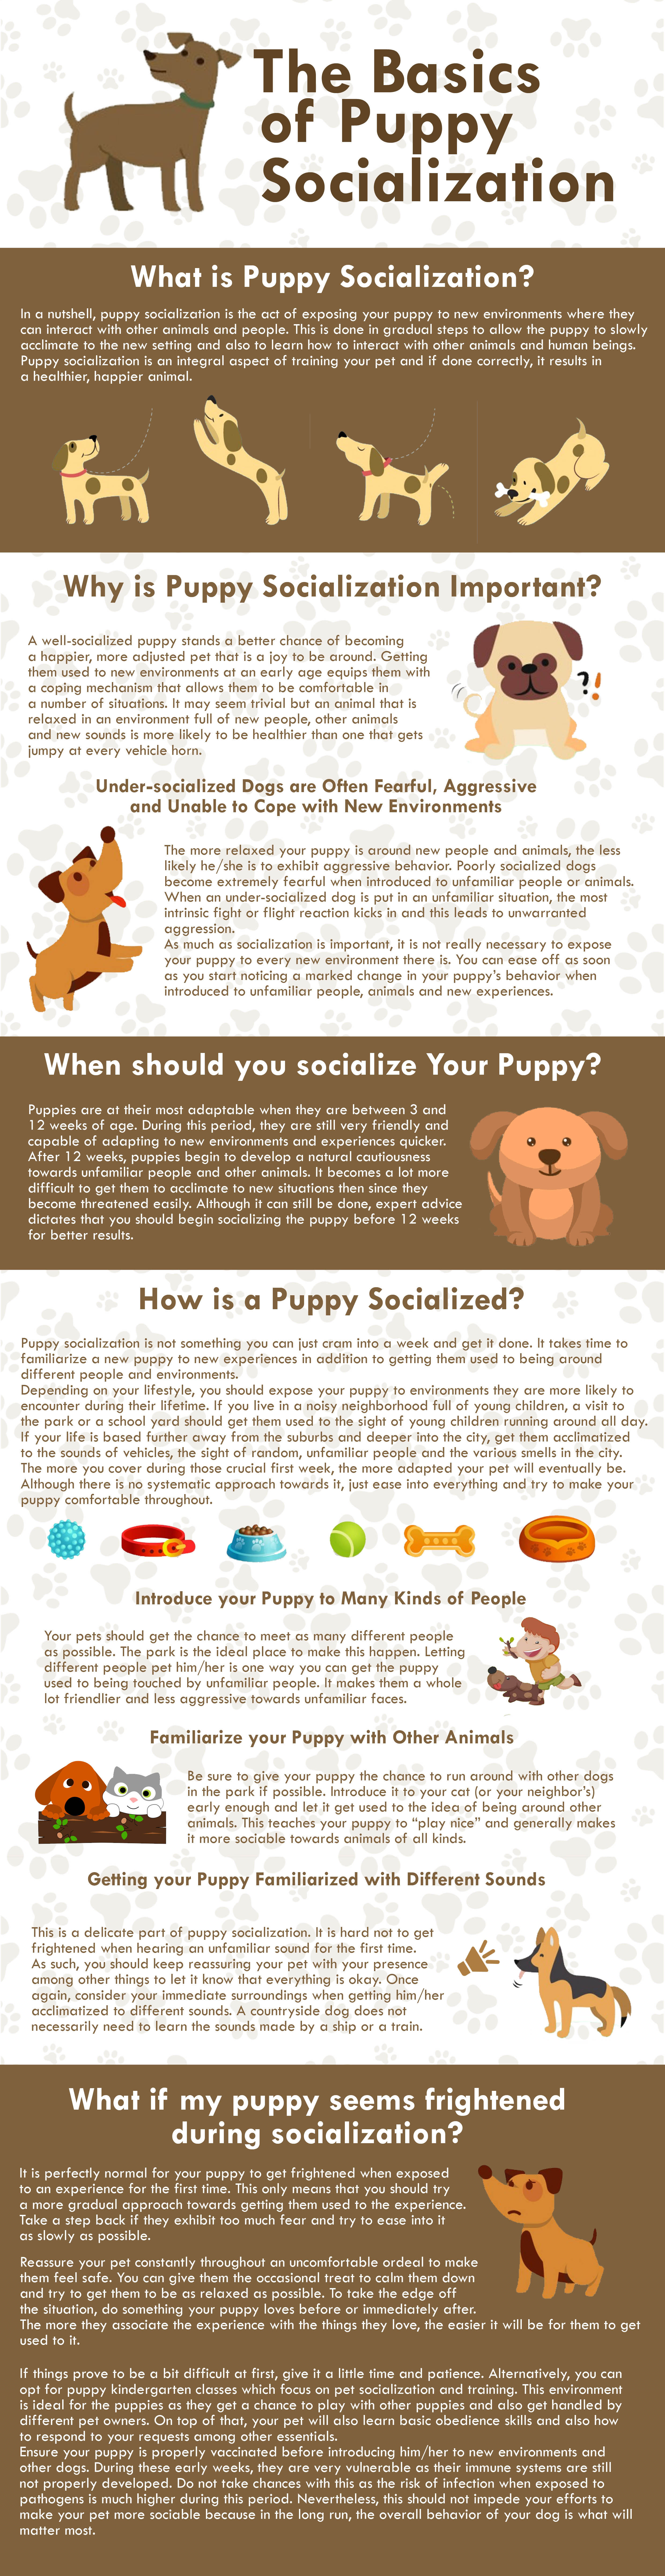 Puppy Socialization Infographic